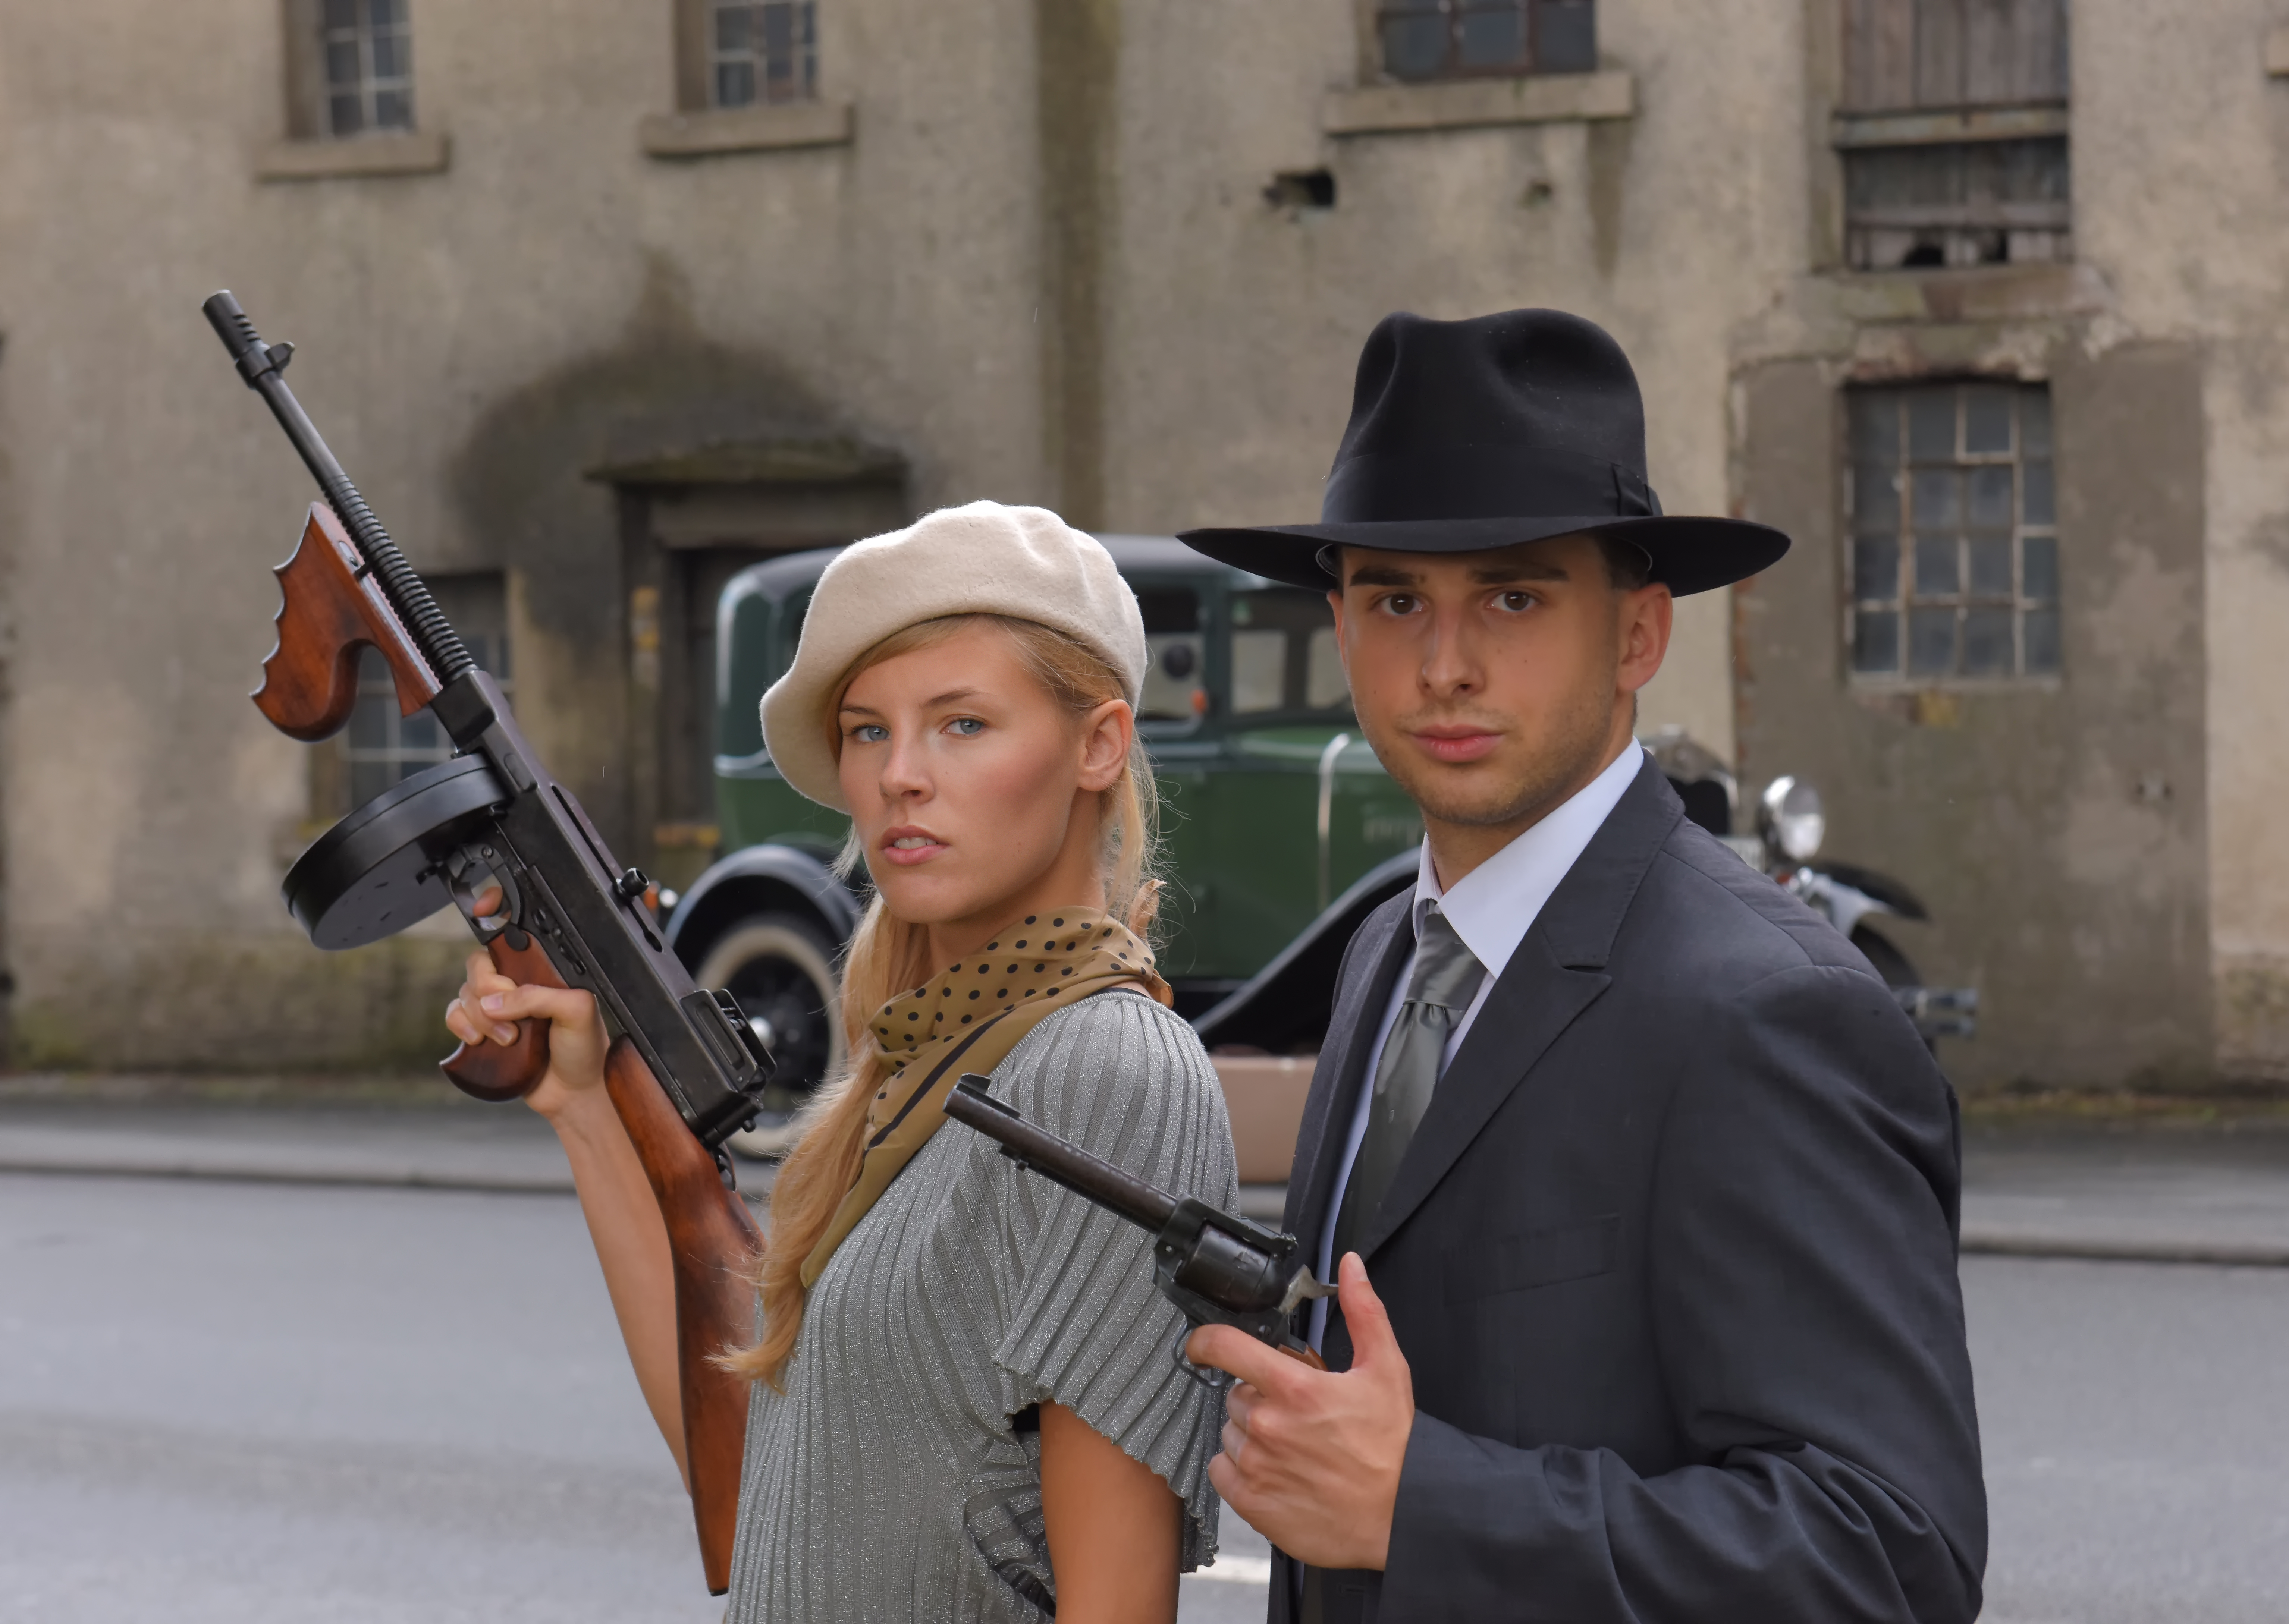 bonnie and clyde costume diy